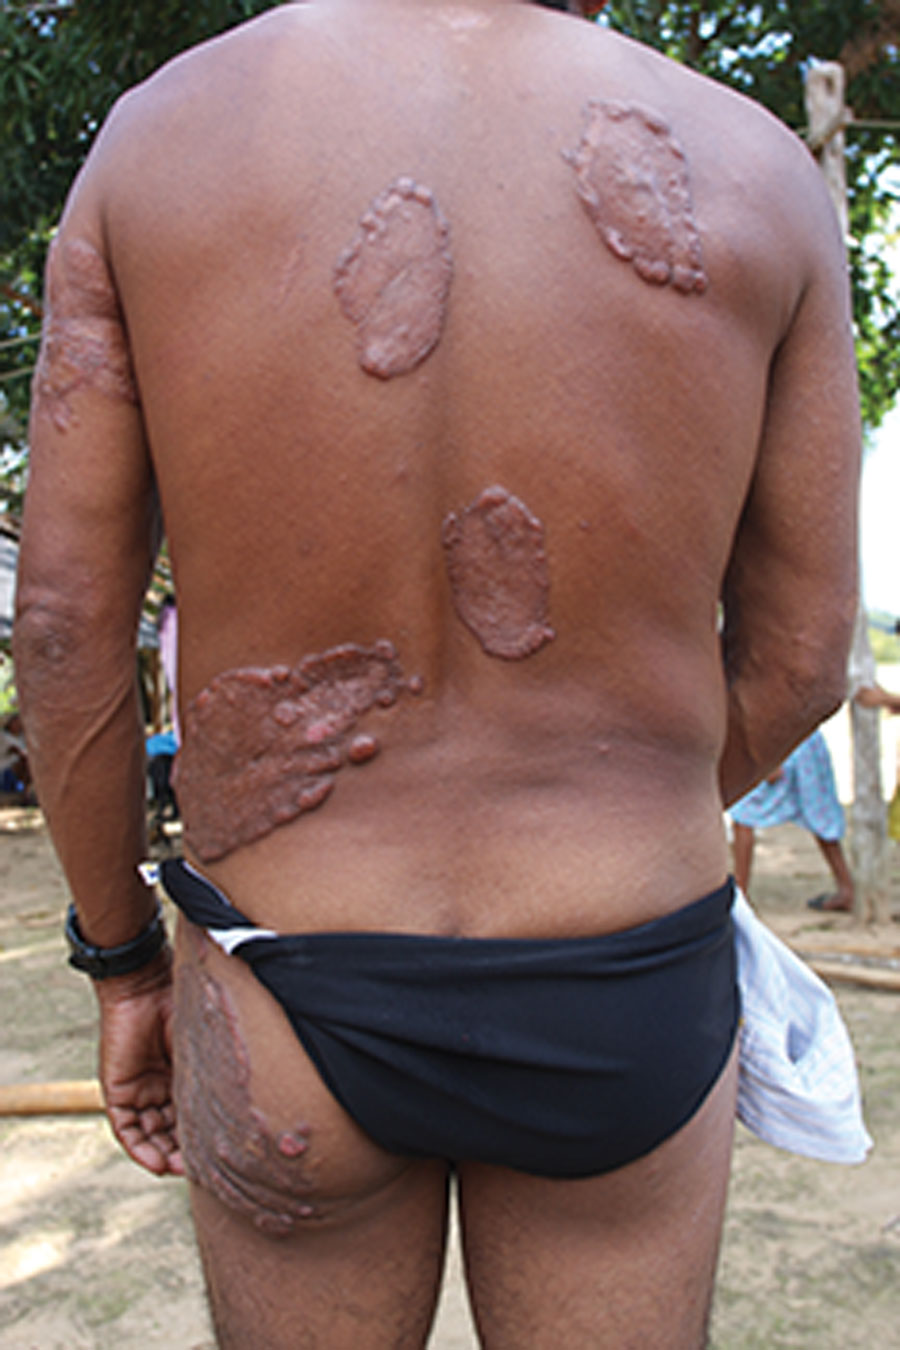 Multicentric lobomycosis affecting the back, buttocks, and arm of a Kaiabi man, Brazil.